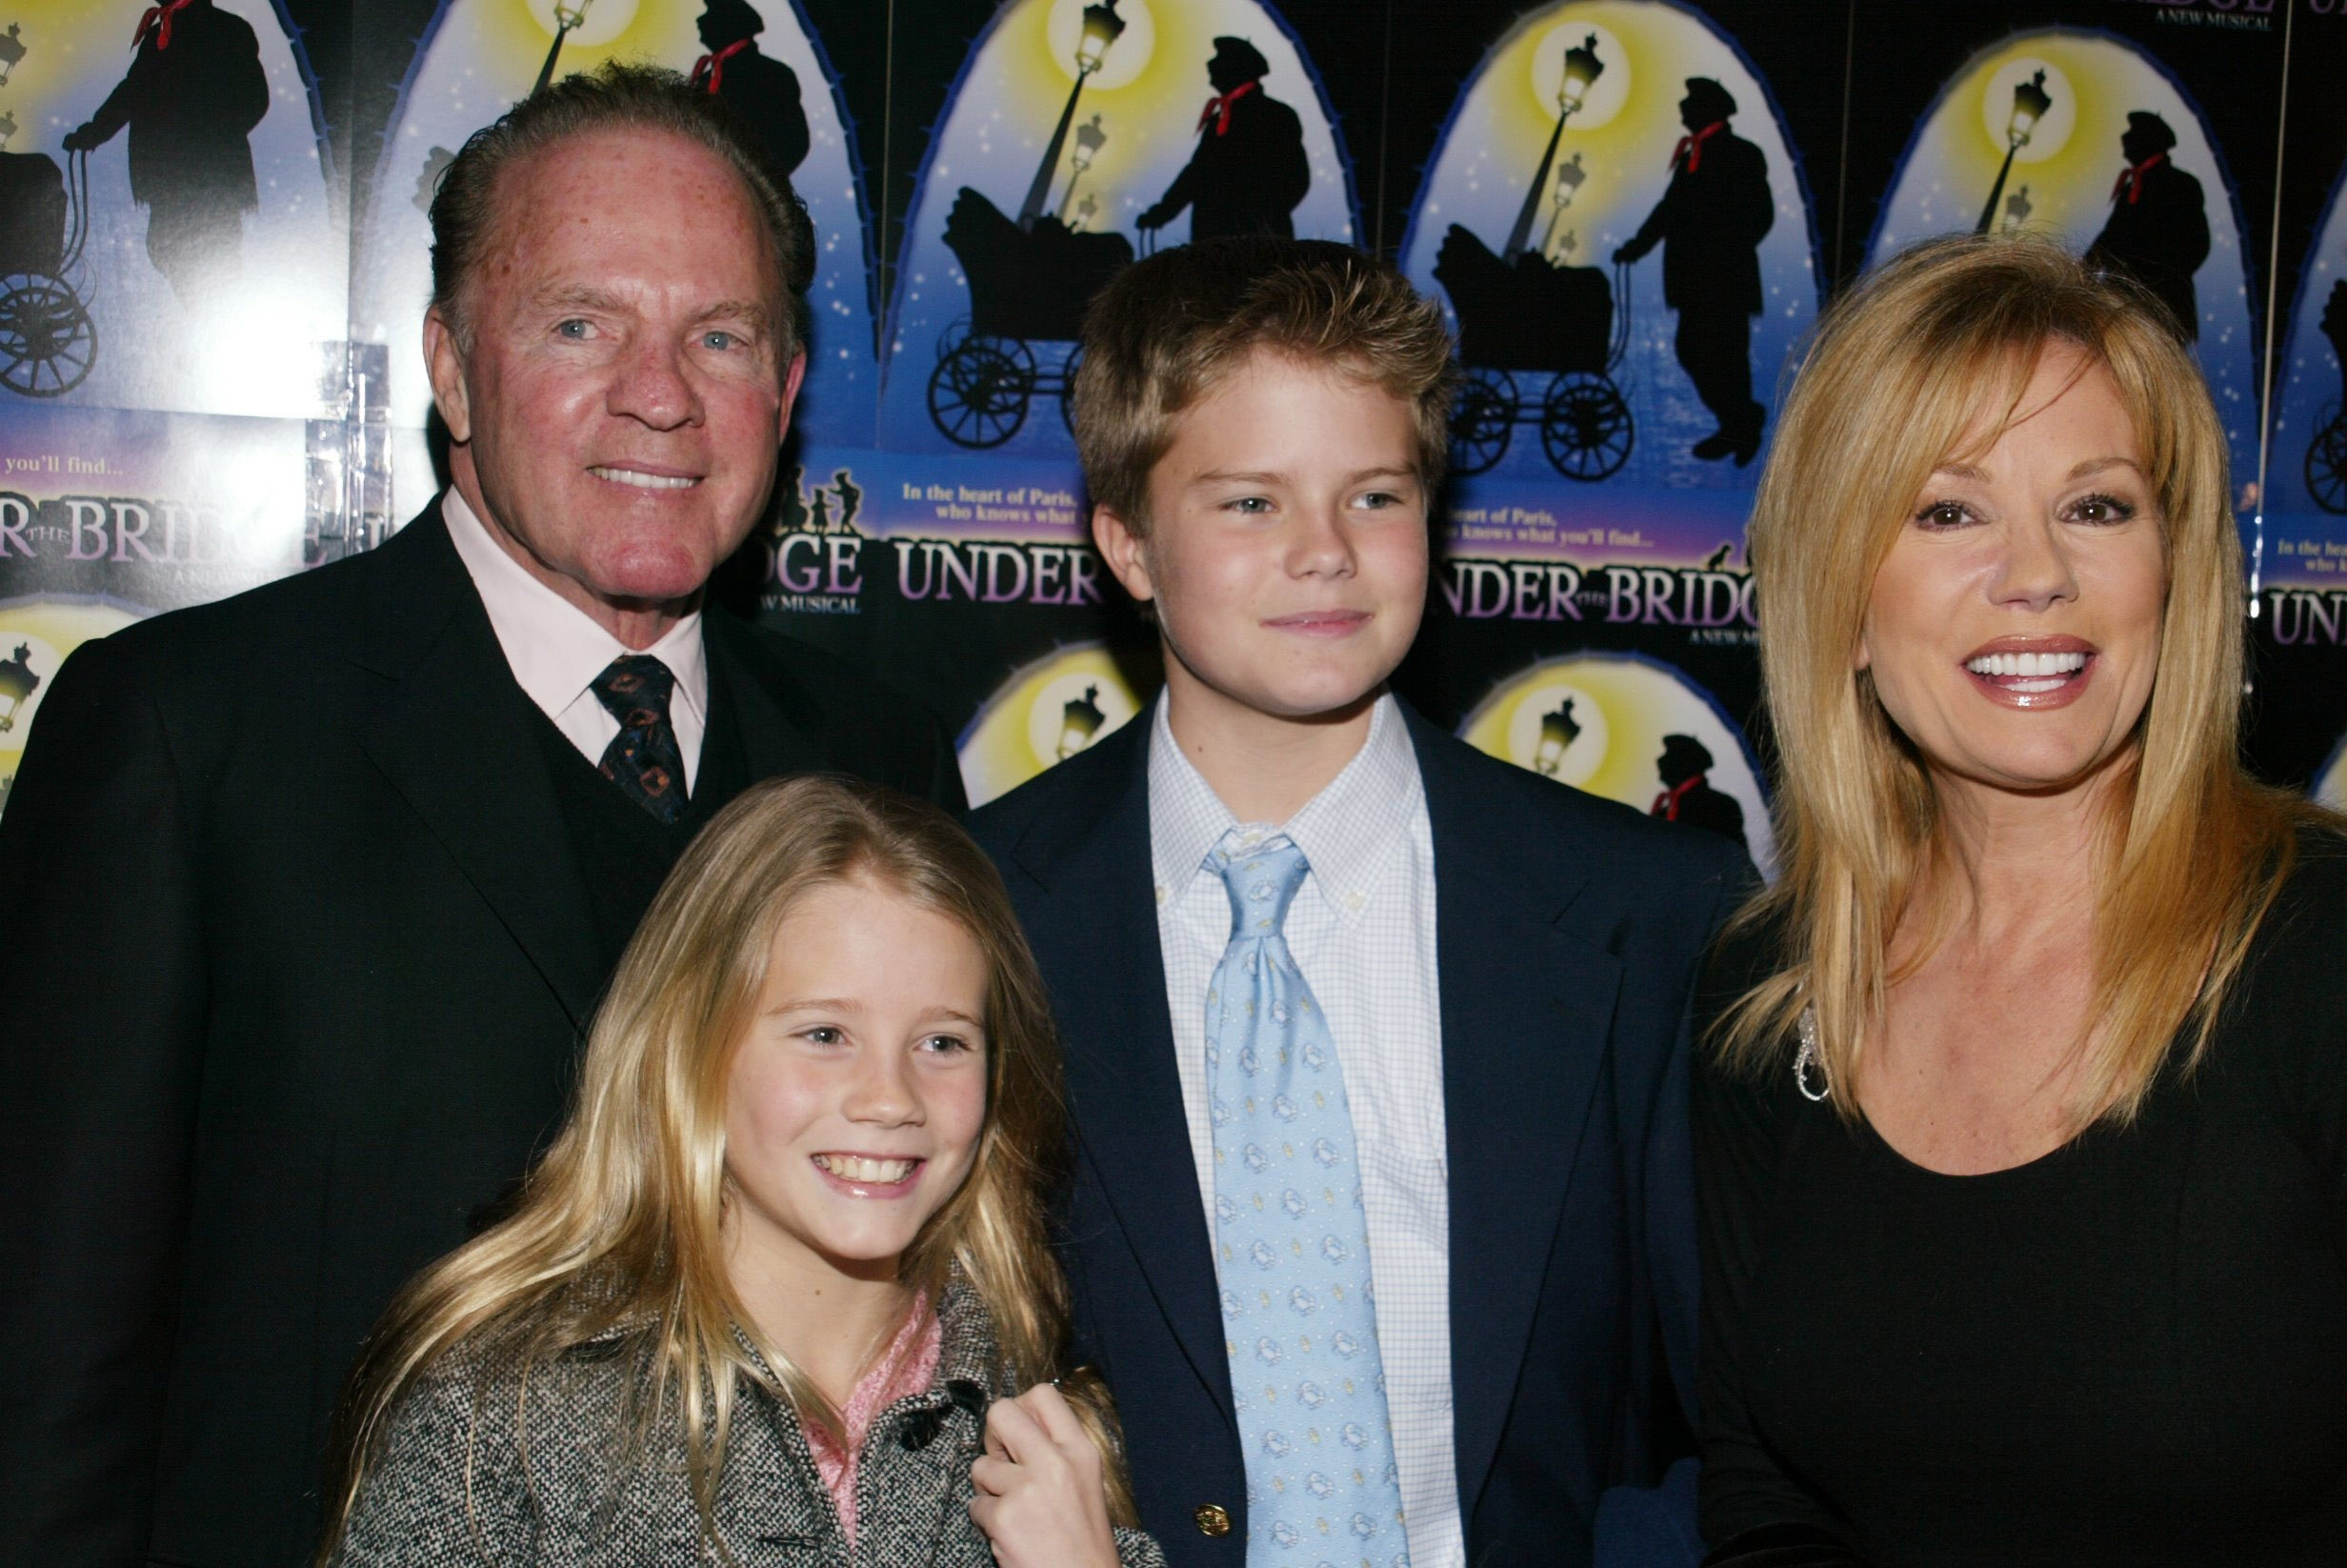 <p>Former football star and sportscaster Frank Gifford and wife Kathie Lee Gifford posed with their kids, Cassidy Gifford (then 11) and Cody Gifford (then 14), on opening night of the musical "Under the Bridge" in New York City on Jan. 6, 2005.</p>